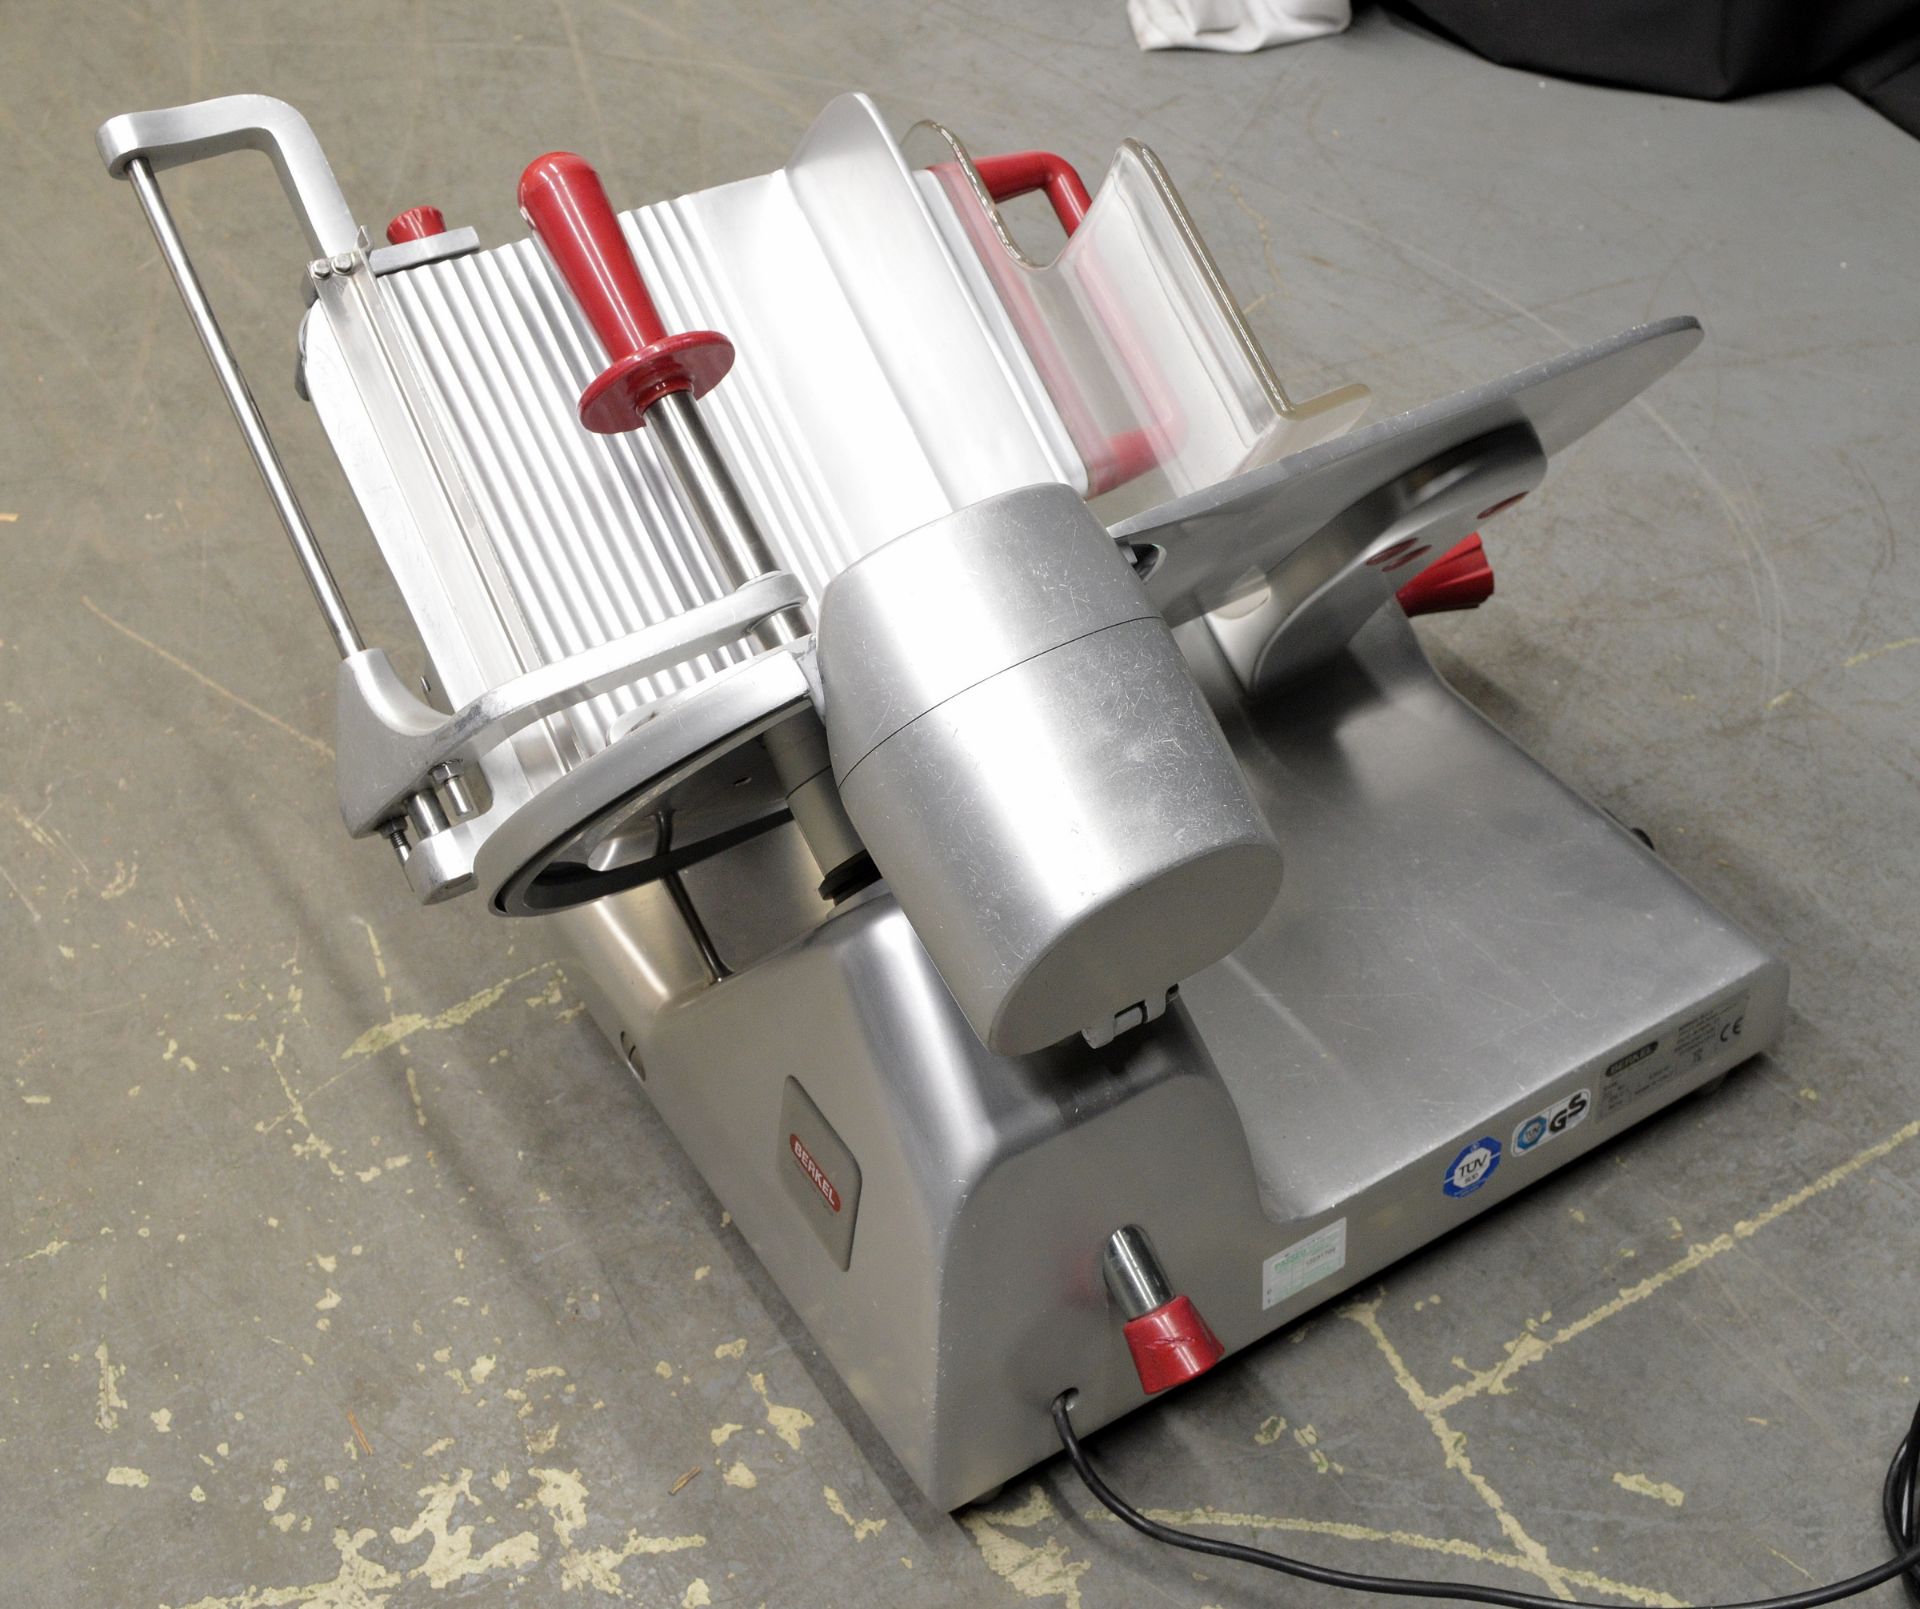 Berkel BSPGL04011A0F 12" Commercial Cooked Meat / Bacon Slicer, single phase electric - Image 3 of 7